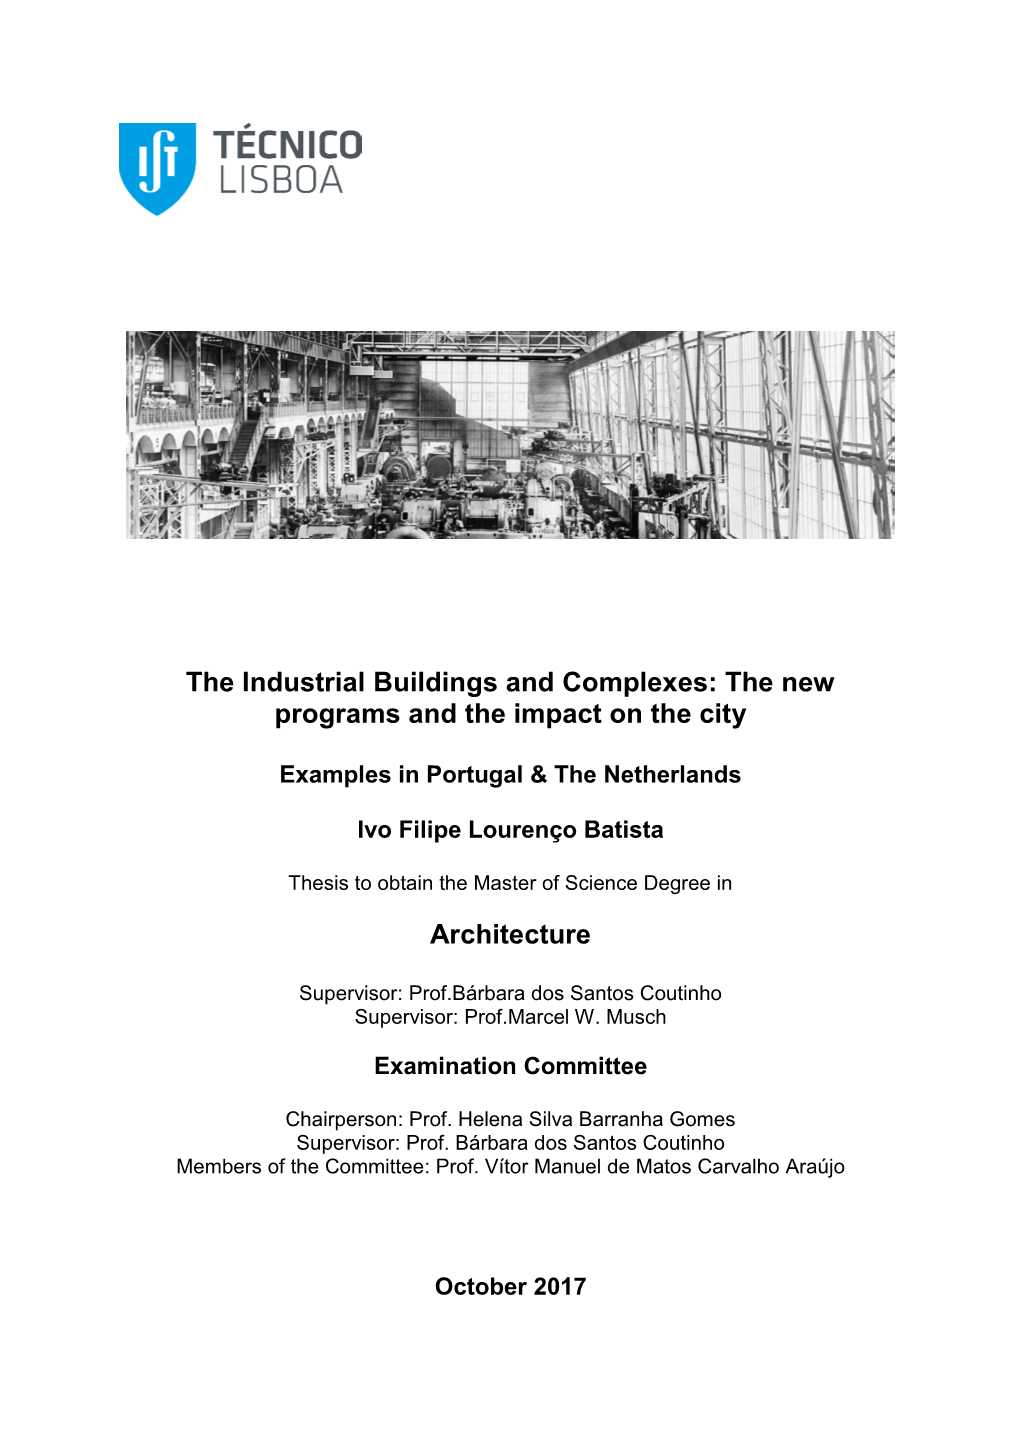 The Industrial Buildings and Complexes: the New Programs and the Impact on the City